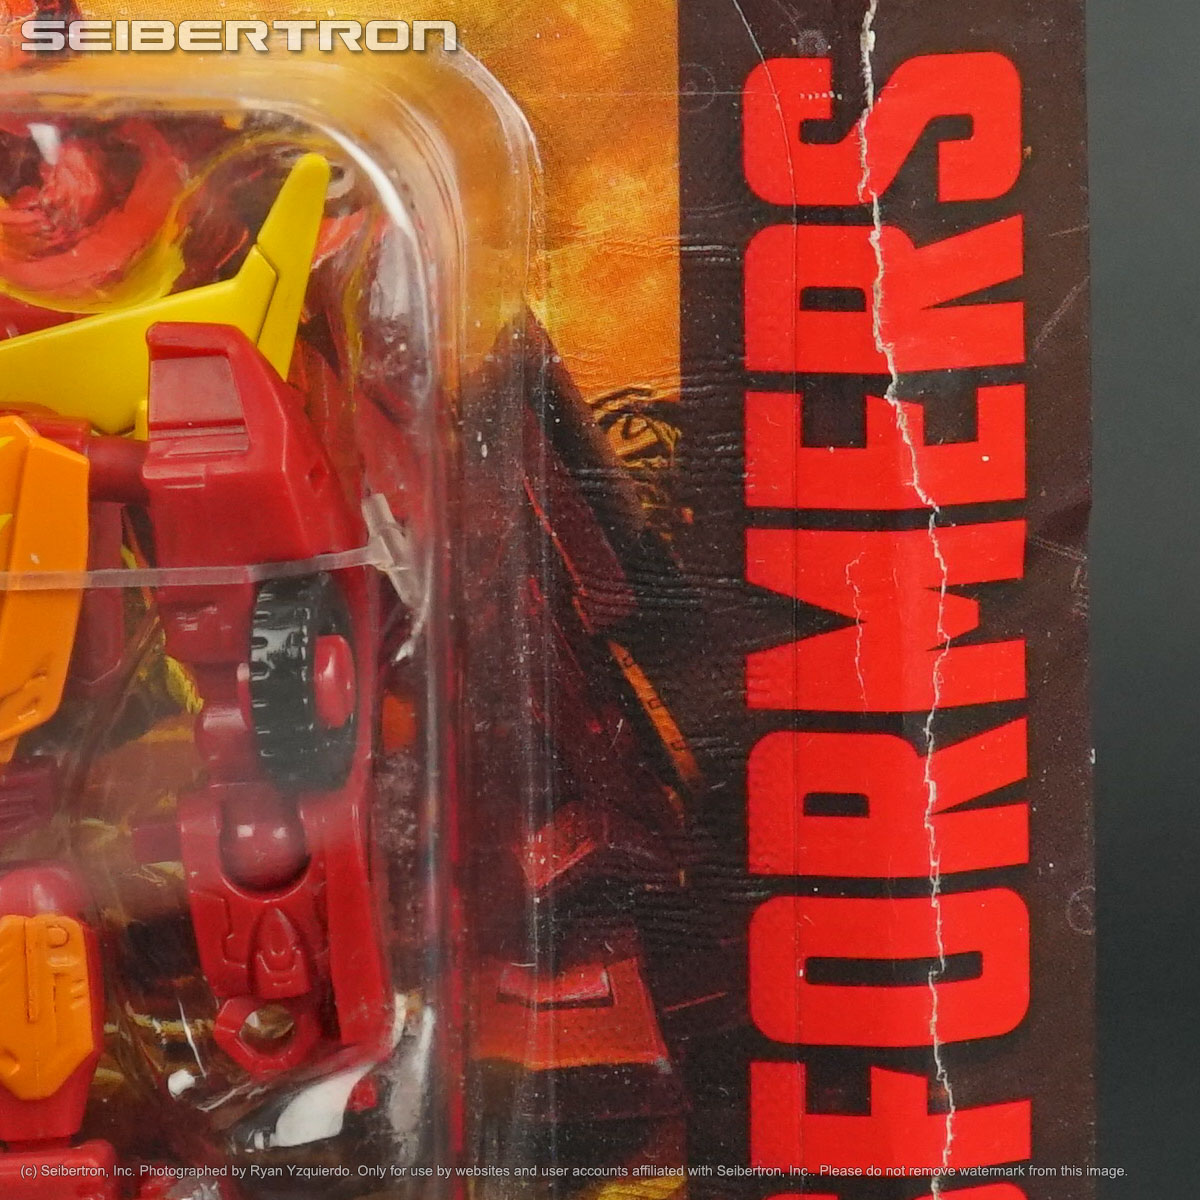 WFC-K43 HOT ROD Transformers War for Cybertron Kingdom Core Hasbro 2022 New 220329 (damaged package)